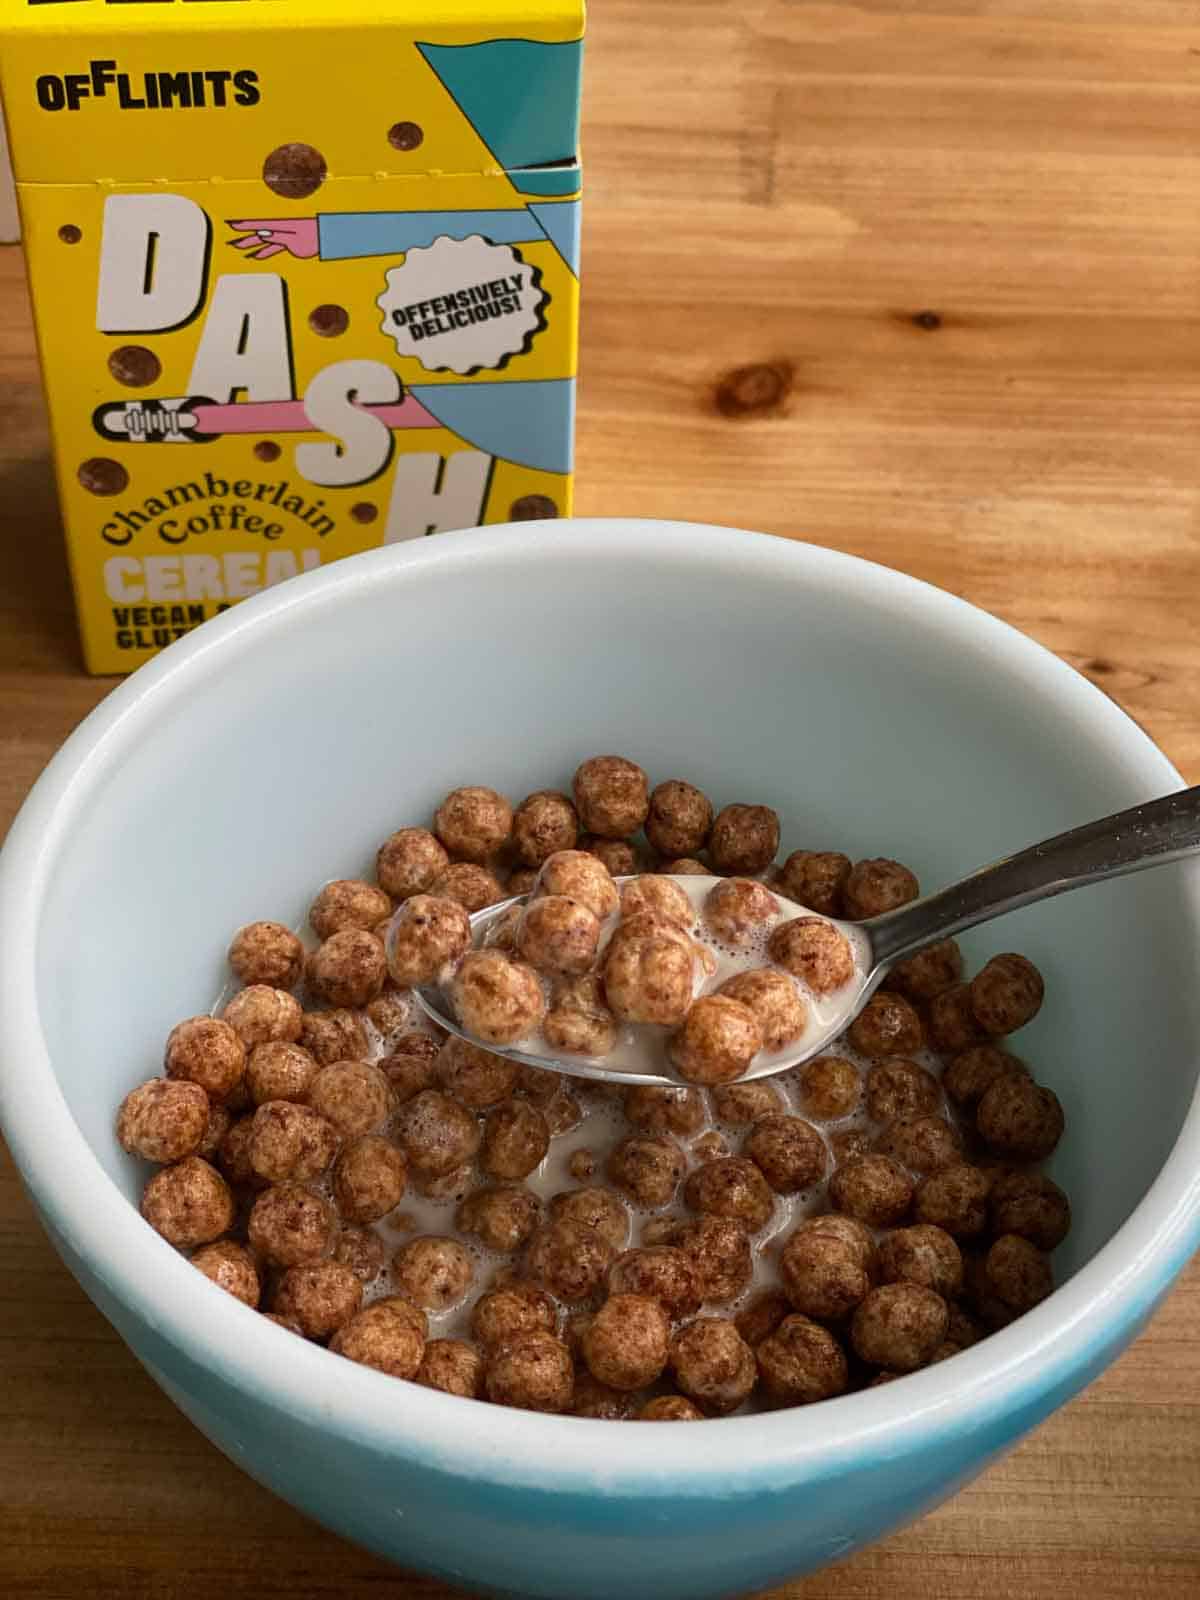 coffee OffLimits cereal in bowl with spoonful of cereal and milk lifted